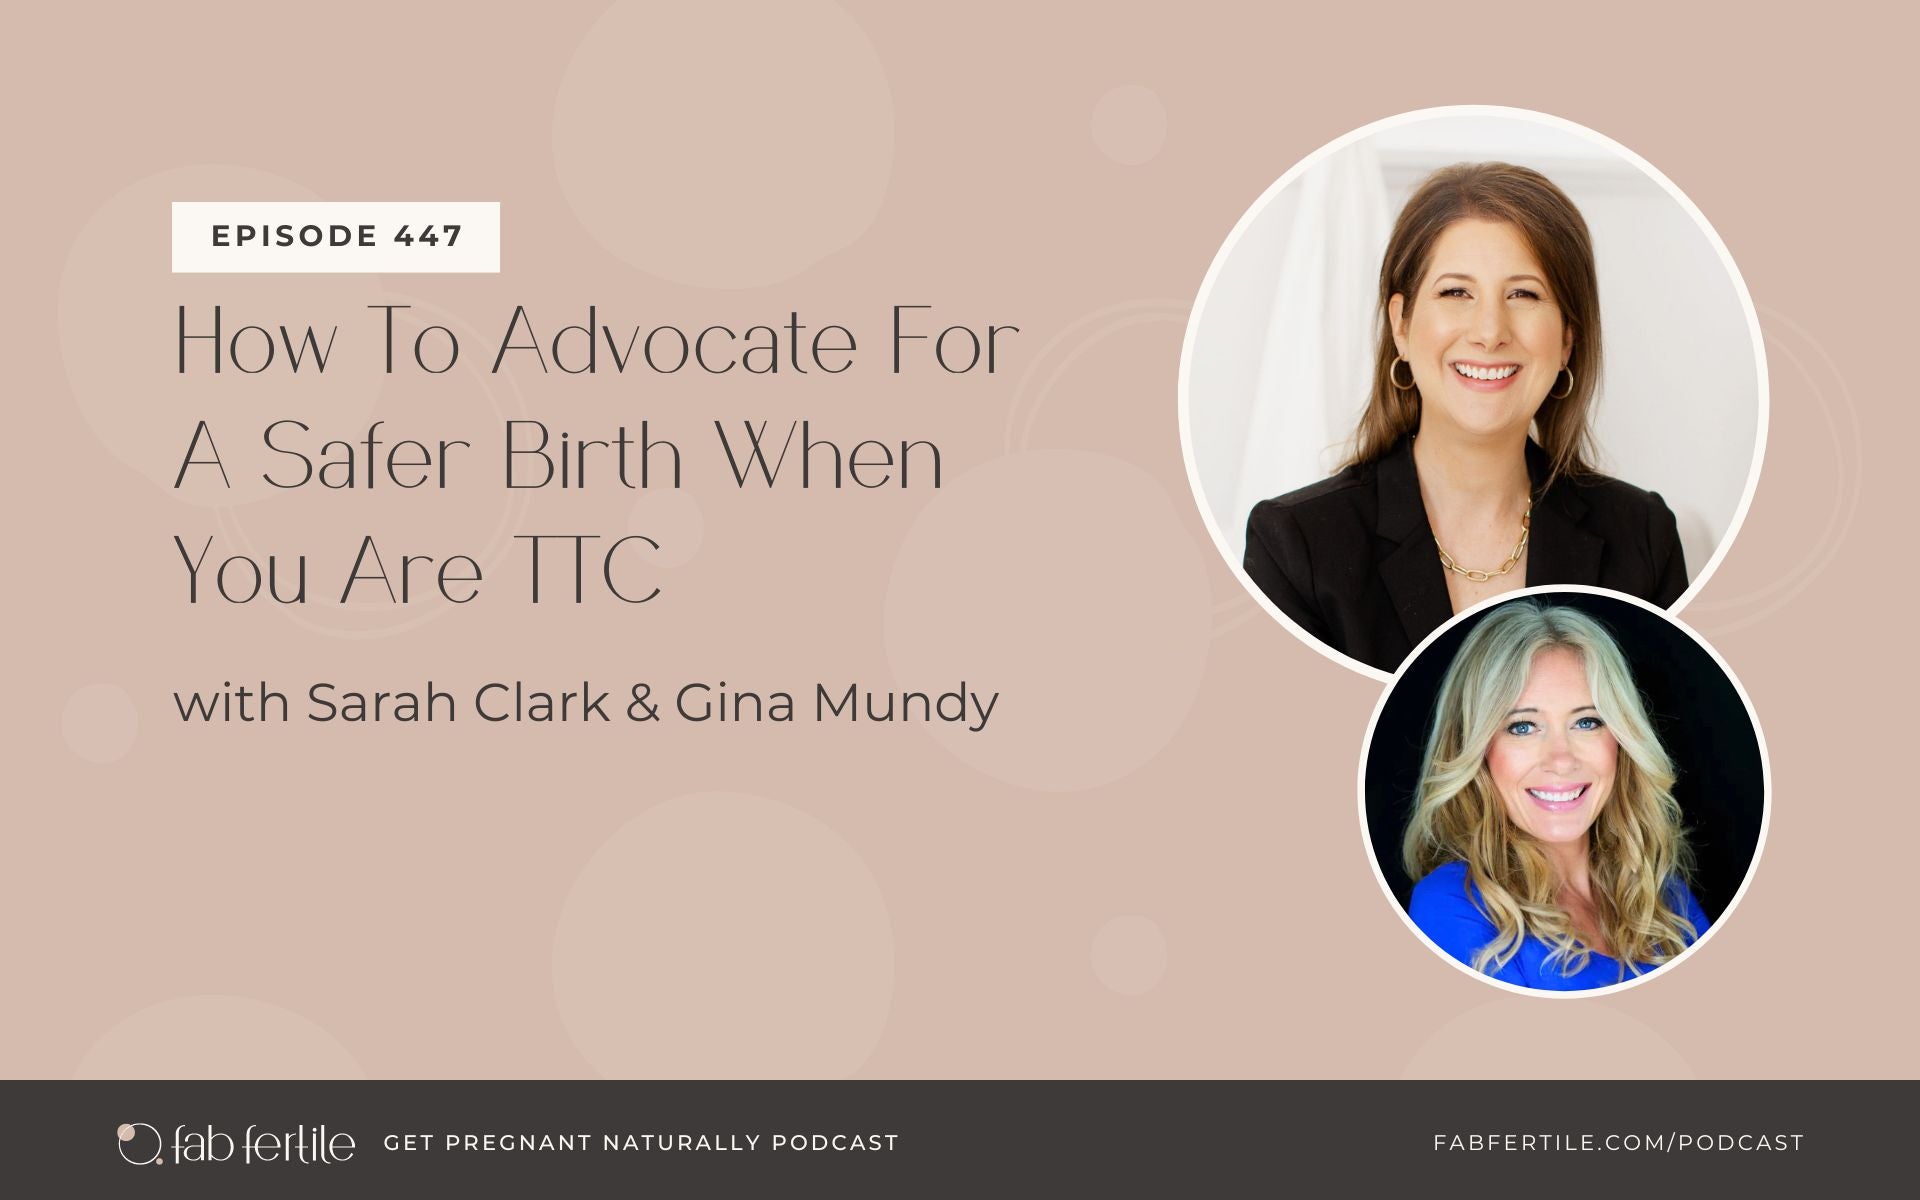 How To Advocate For A Safer Birth When You Are TTC with Gina Mundy